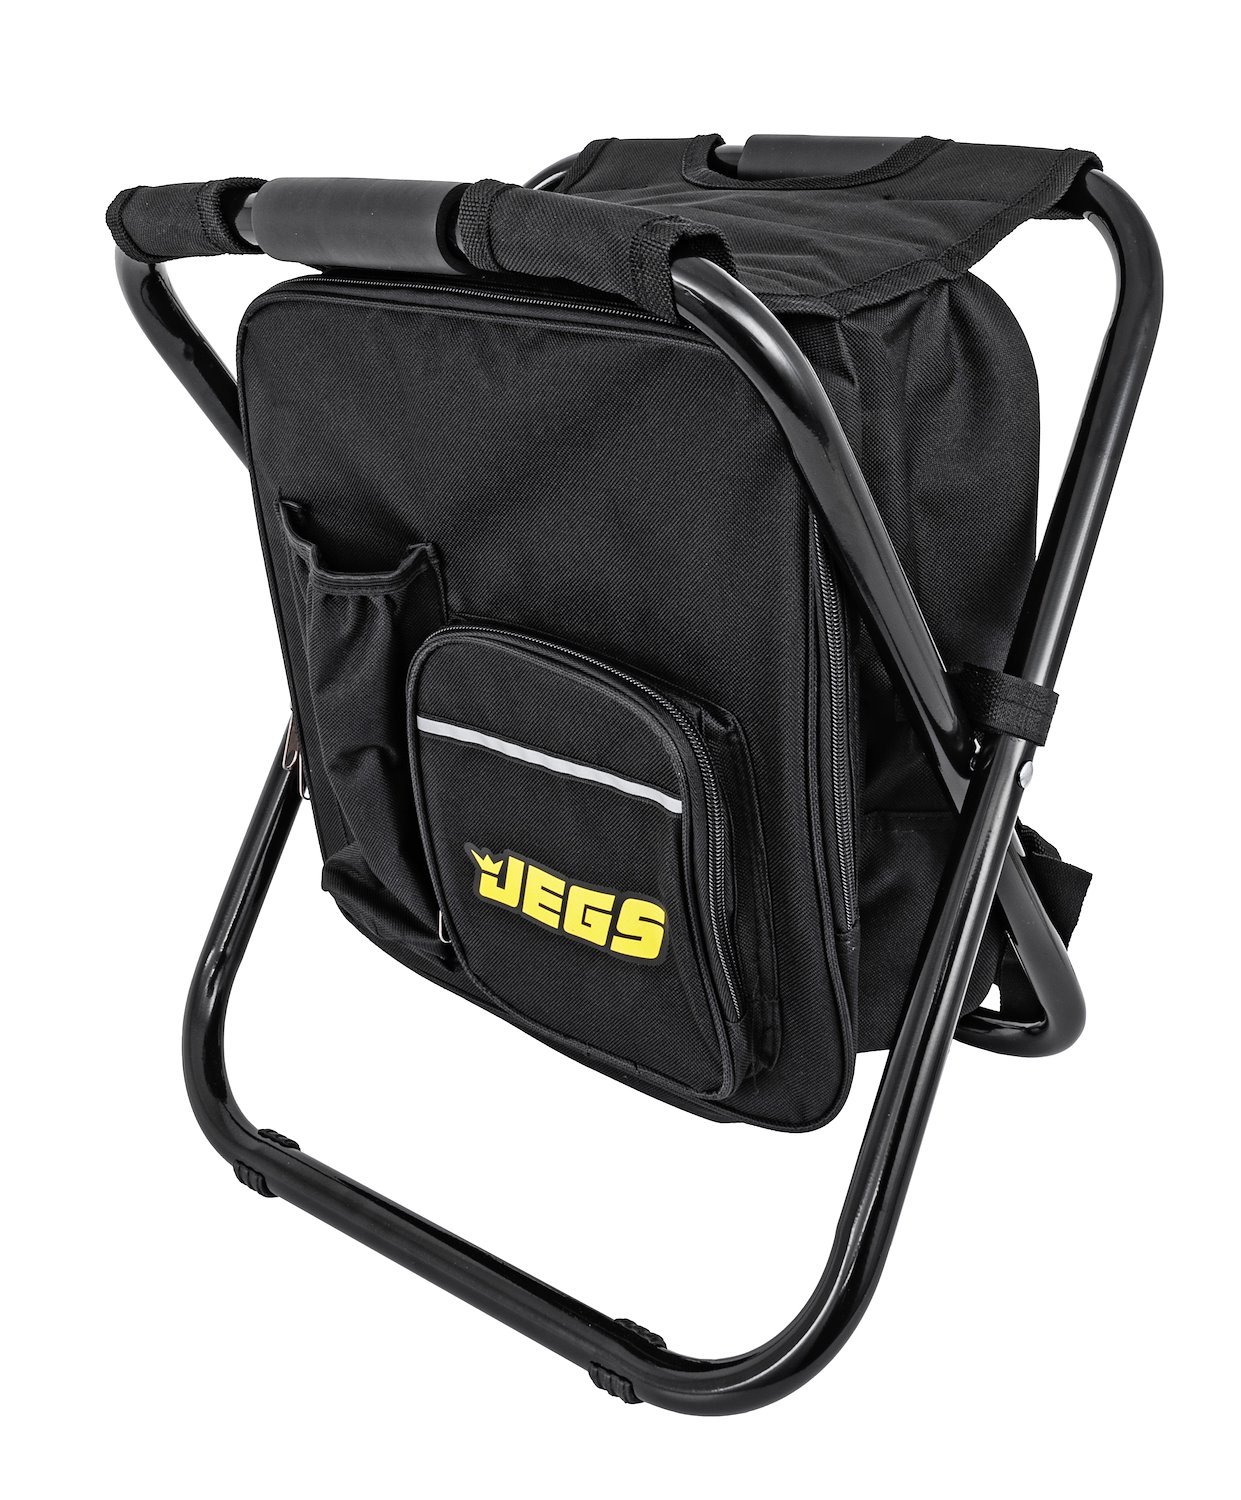 3-in-1 Backpack, Seat, Cooler